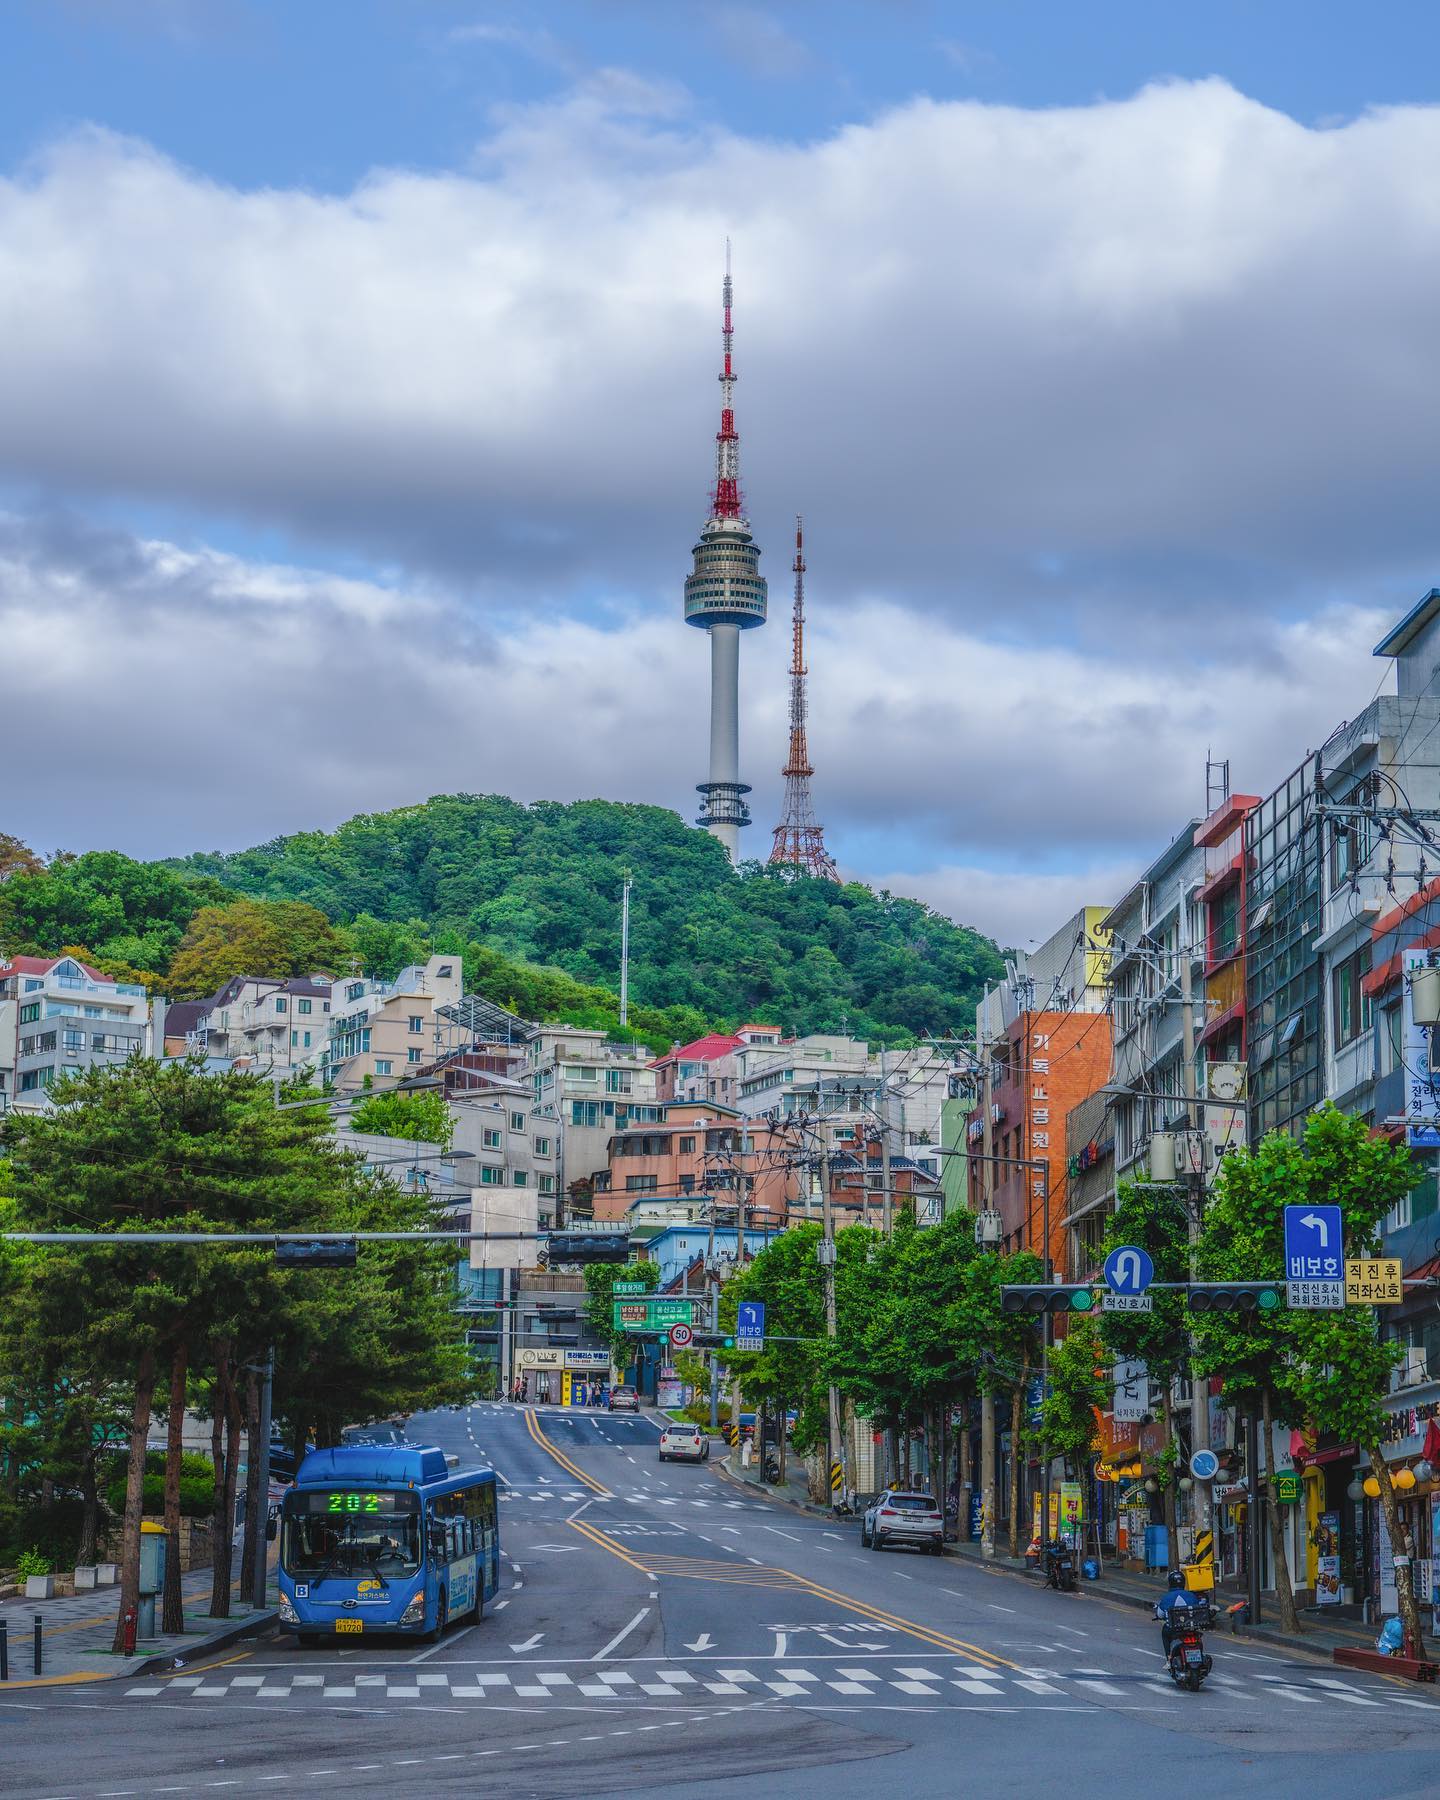 N Seoul Tower on Mt Namsan seen from a road between Yongsan and Jung Districts, downtown Seoul [1440×1800]